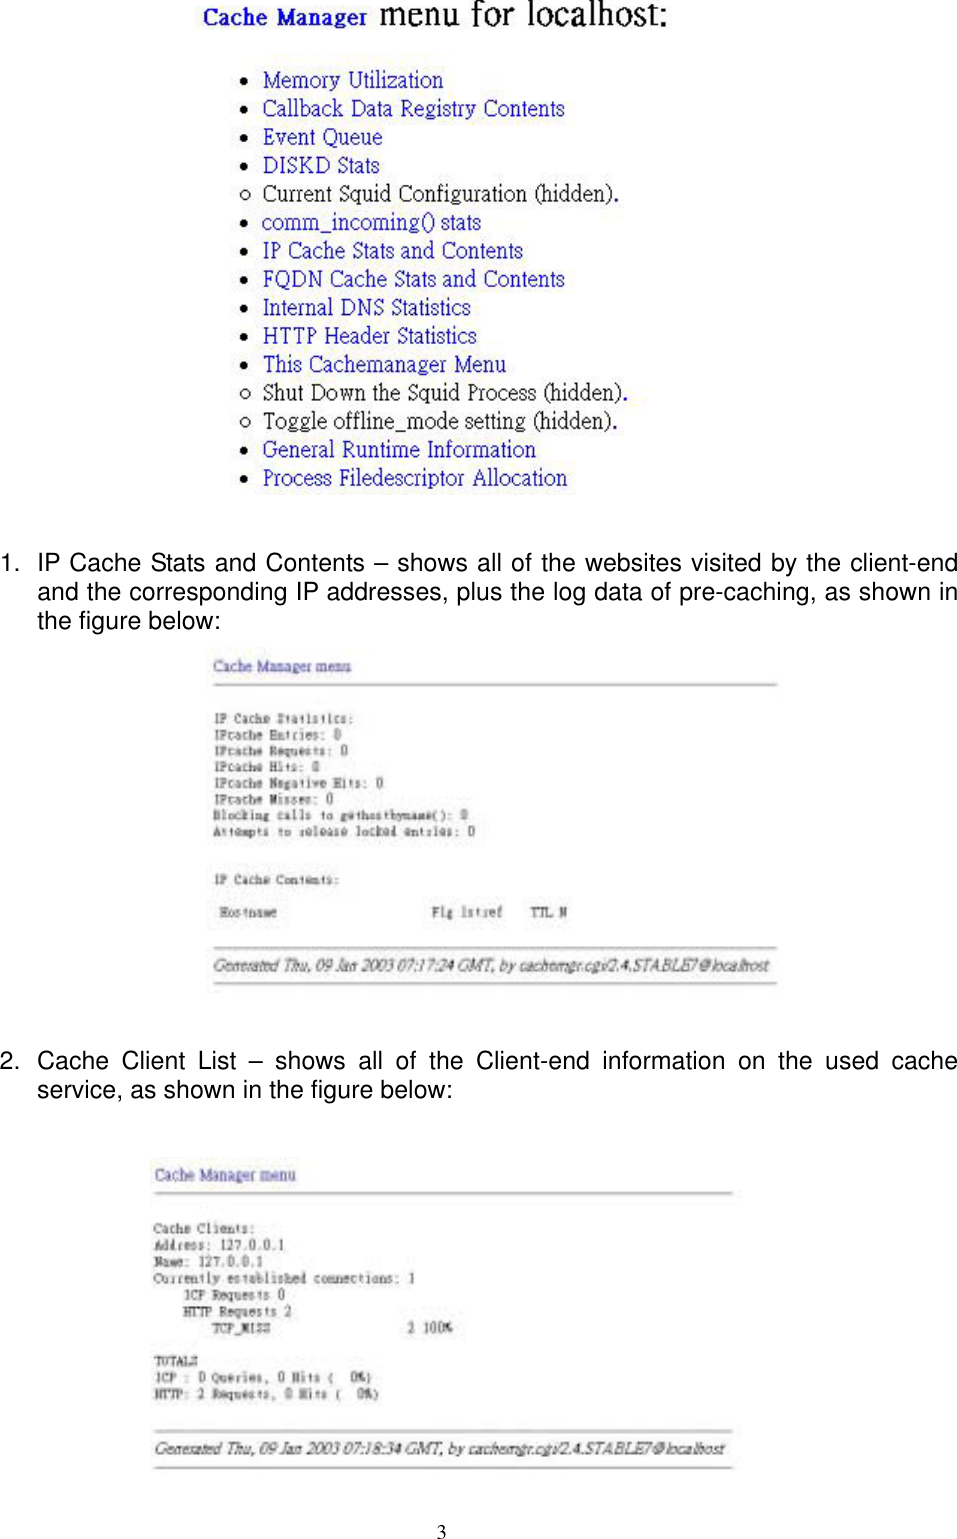  3  1.  IP Cache Stats and Contents – shows all of the websites visited by the client-end and the corresponding IP addresses, plus the log data of pre-caching, as shown in the figure below:   2.  Cache Client List – shows all of the Client-end information on the used cache service, as shown in the figure below:     